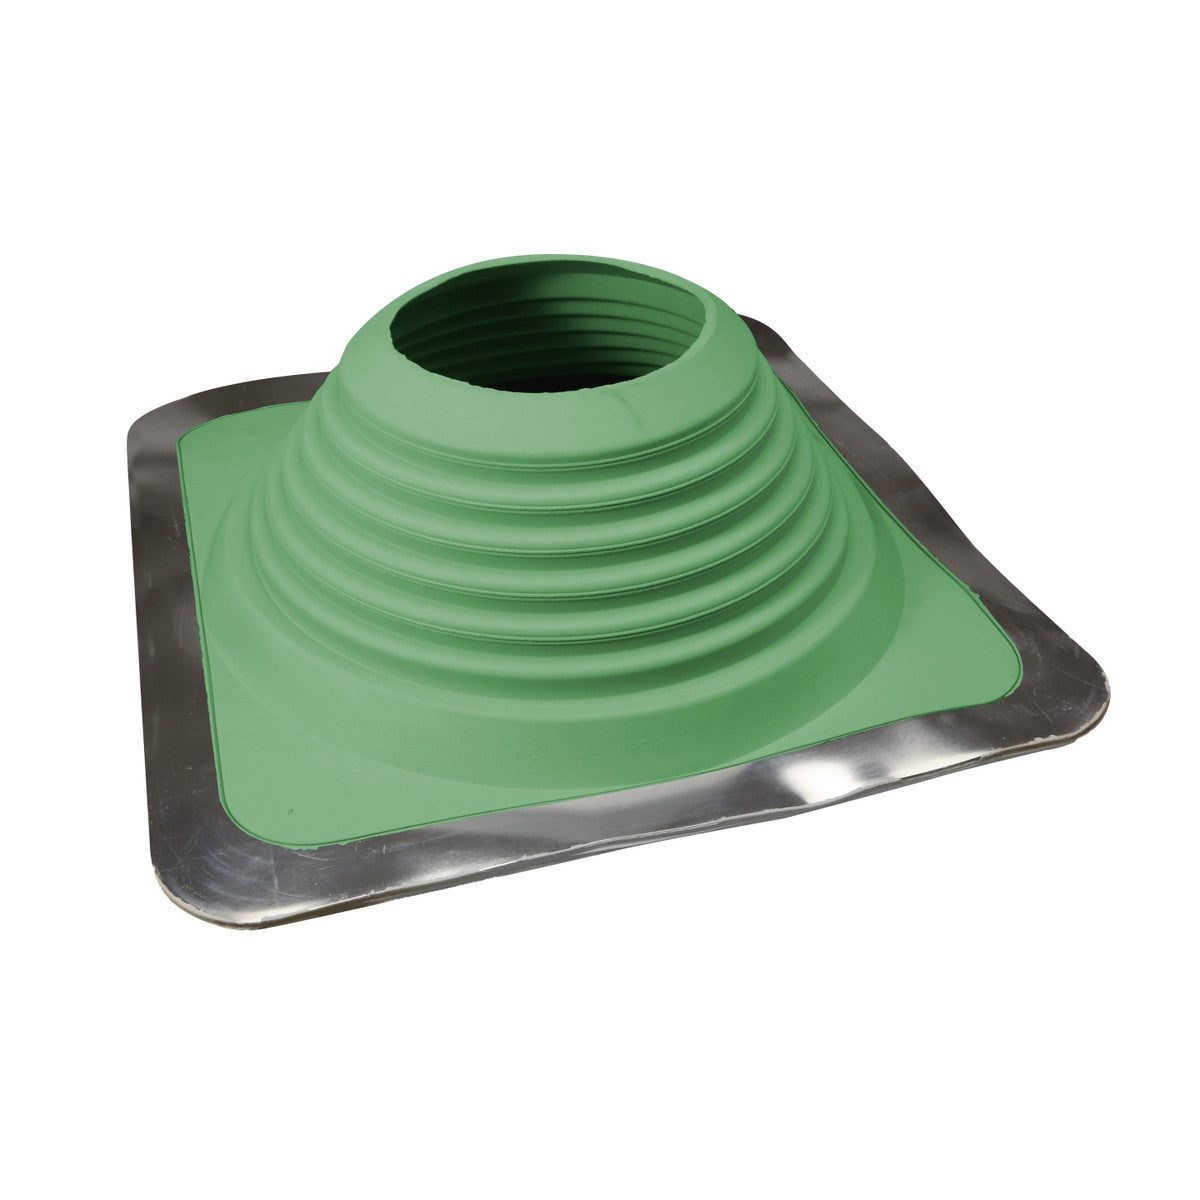 #8 Roofjack Square EPDM Pipe Flashing Boot, Light Green